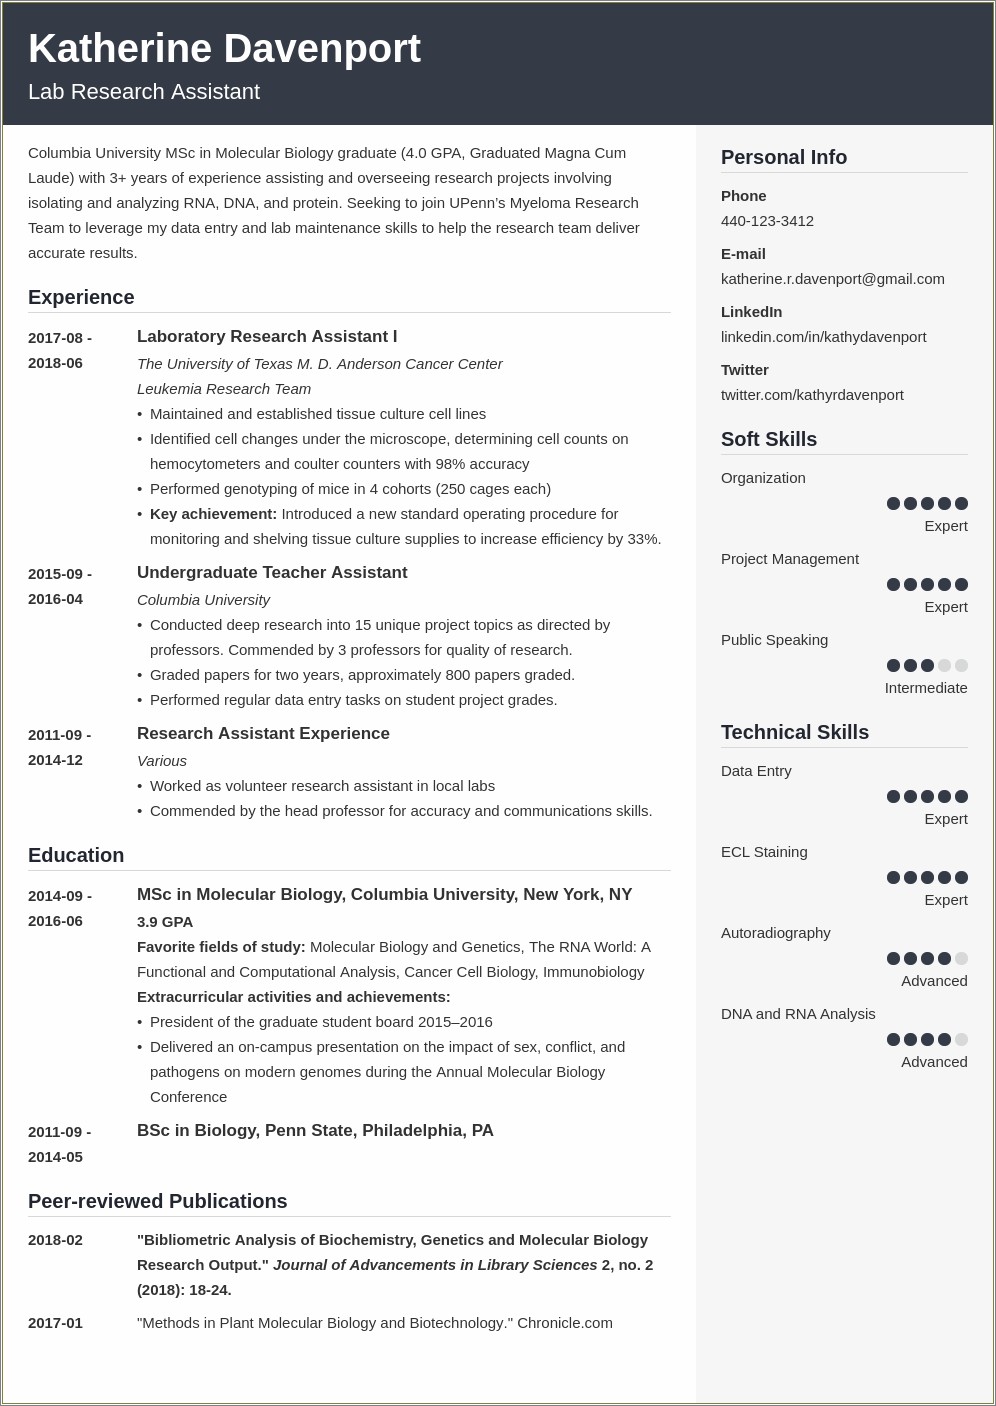 Sample Summary Resume For Research Assistant